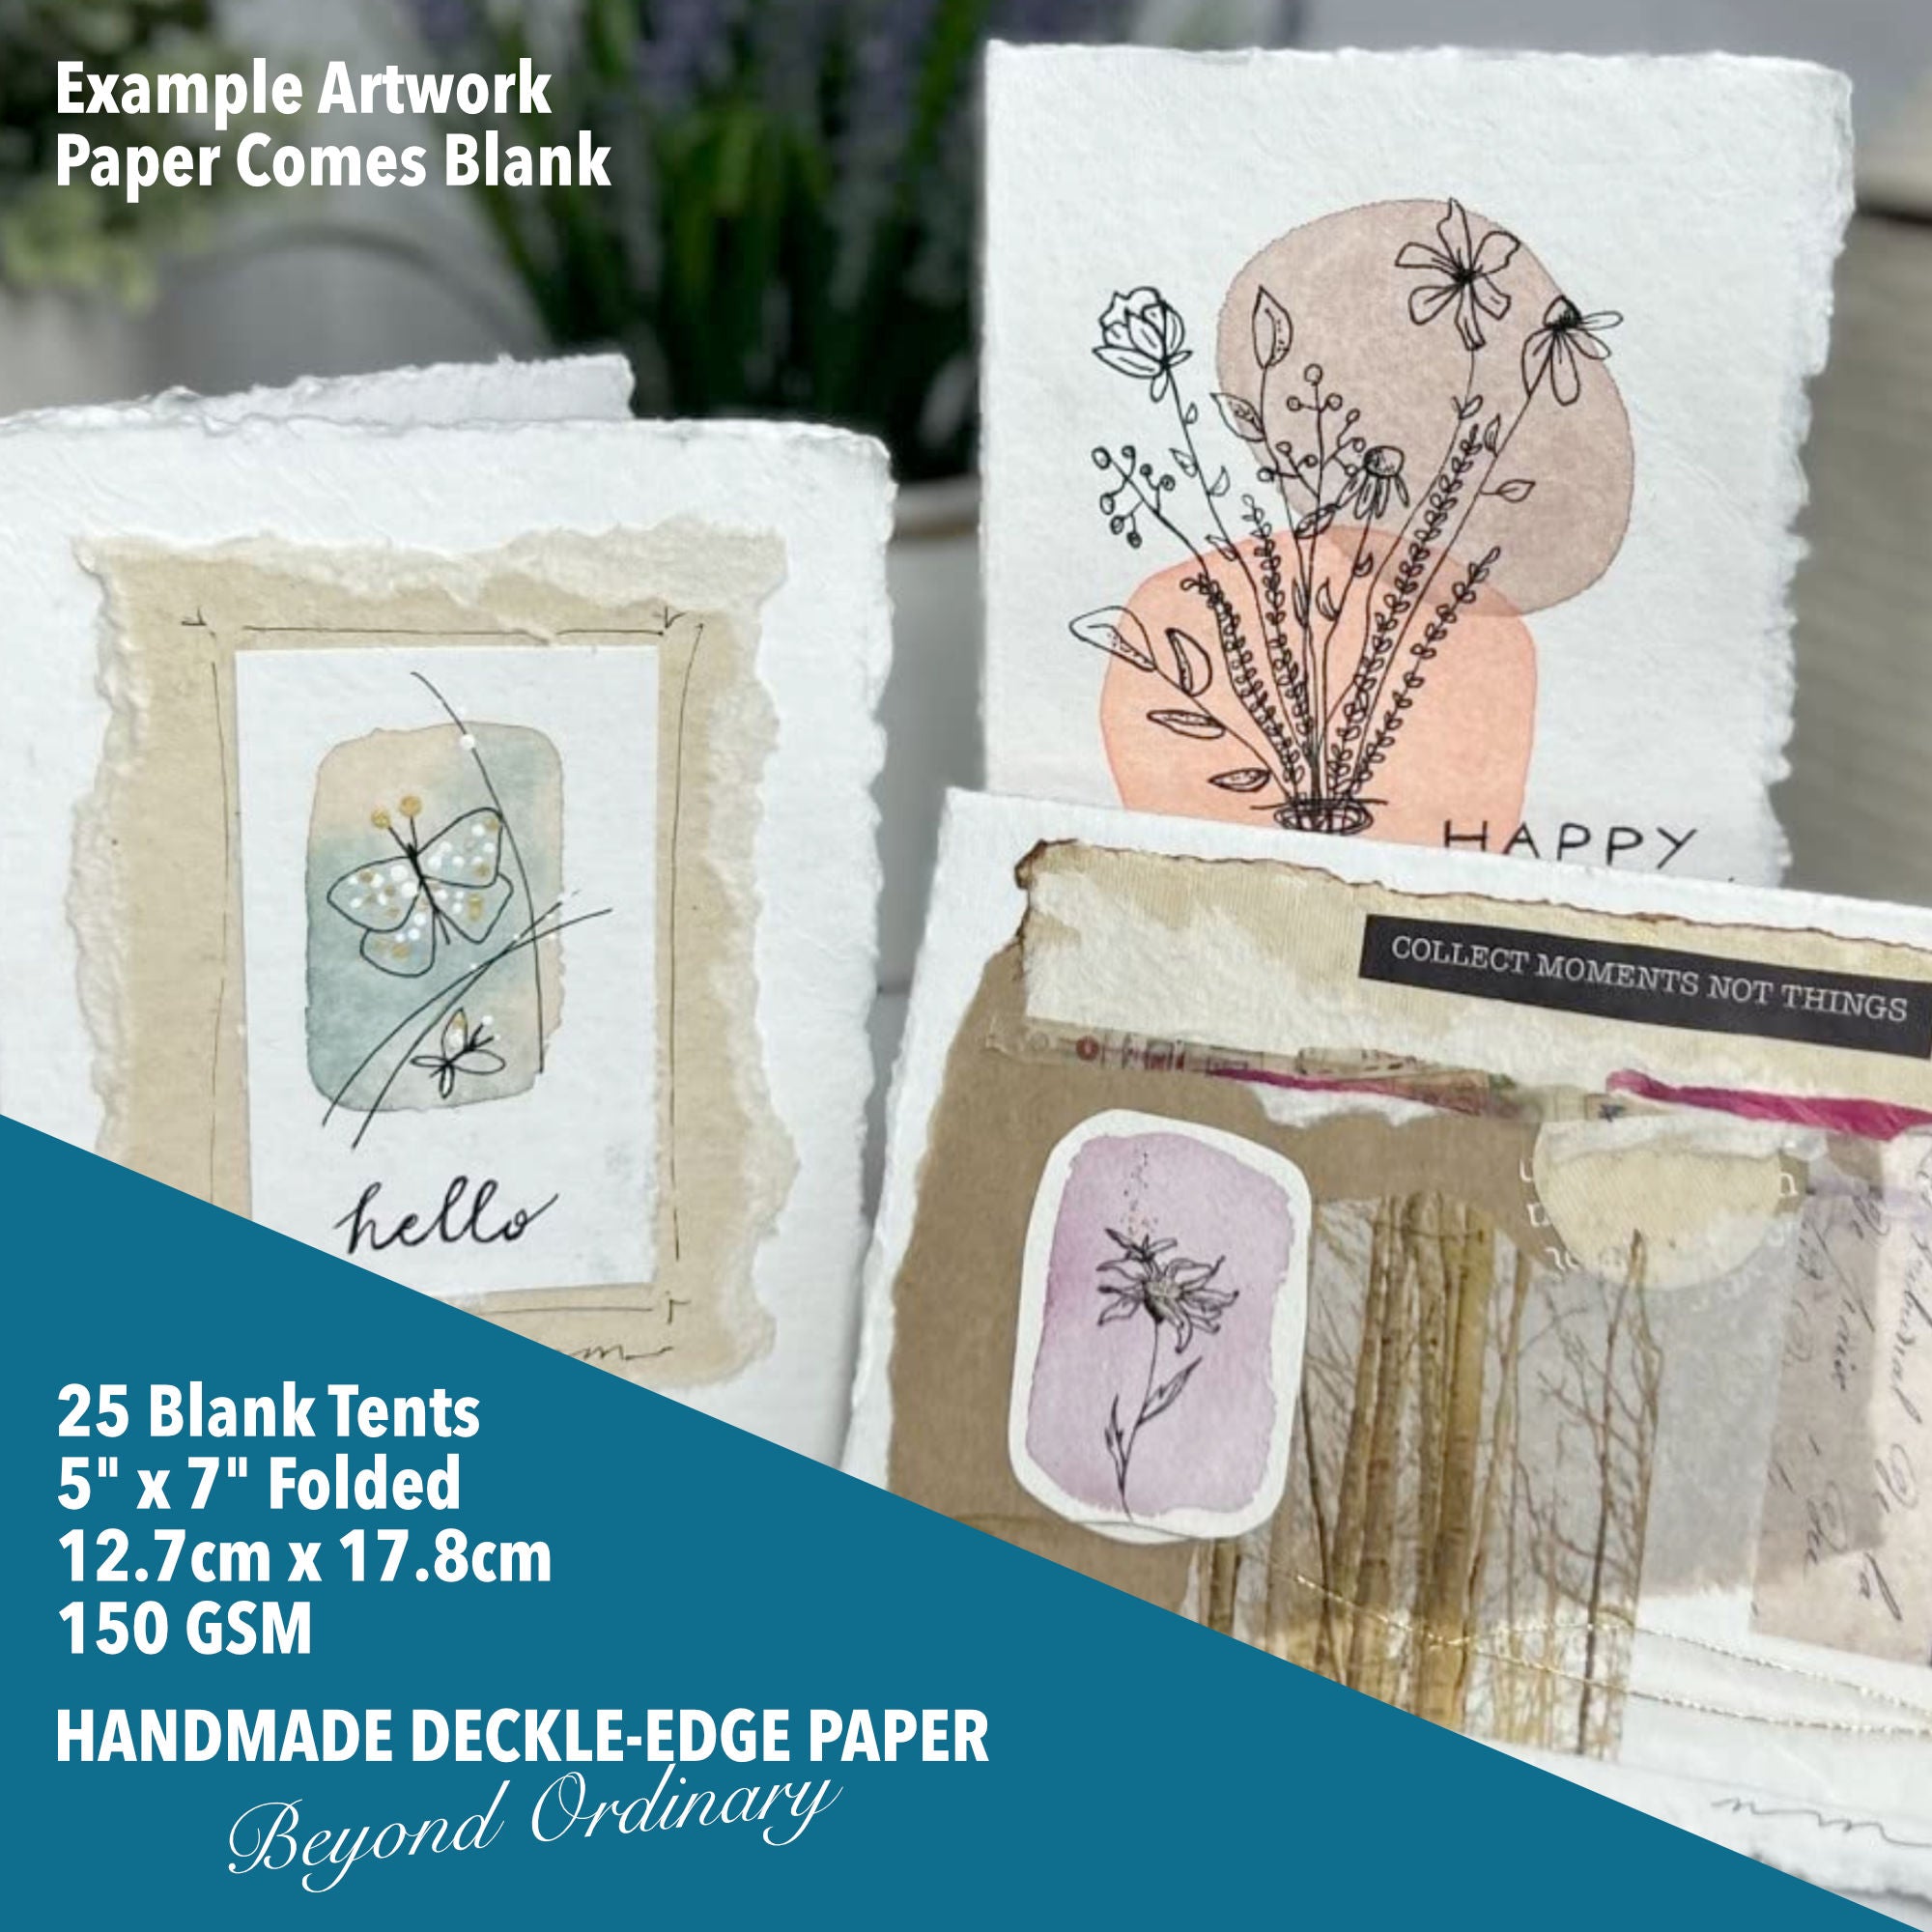 Create Deckled Edges on Hand Made Paper